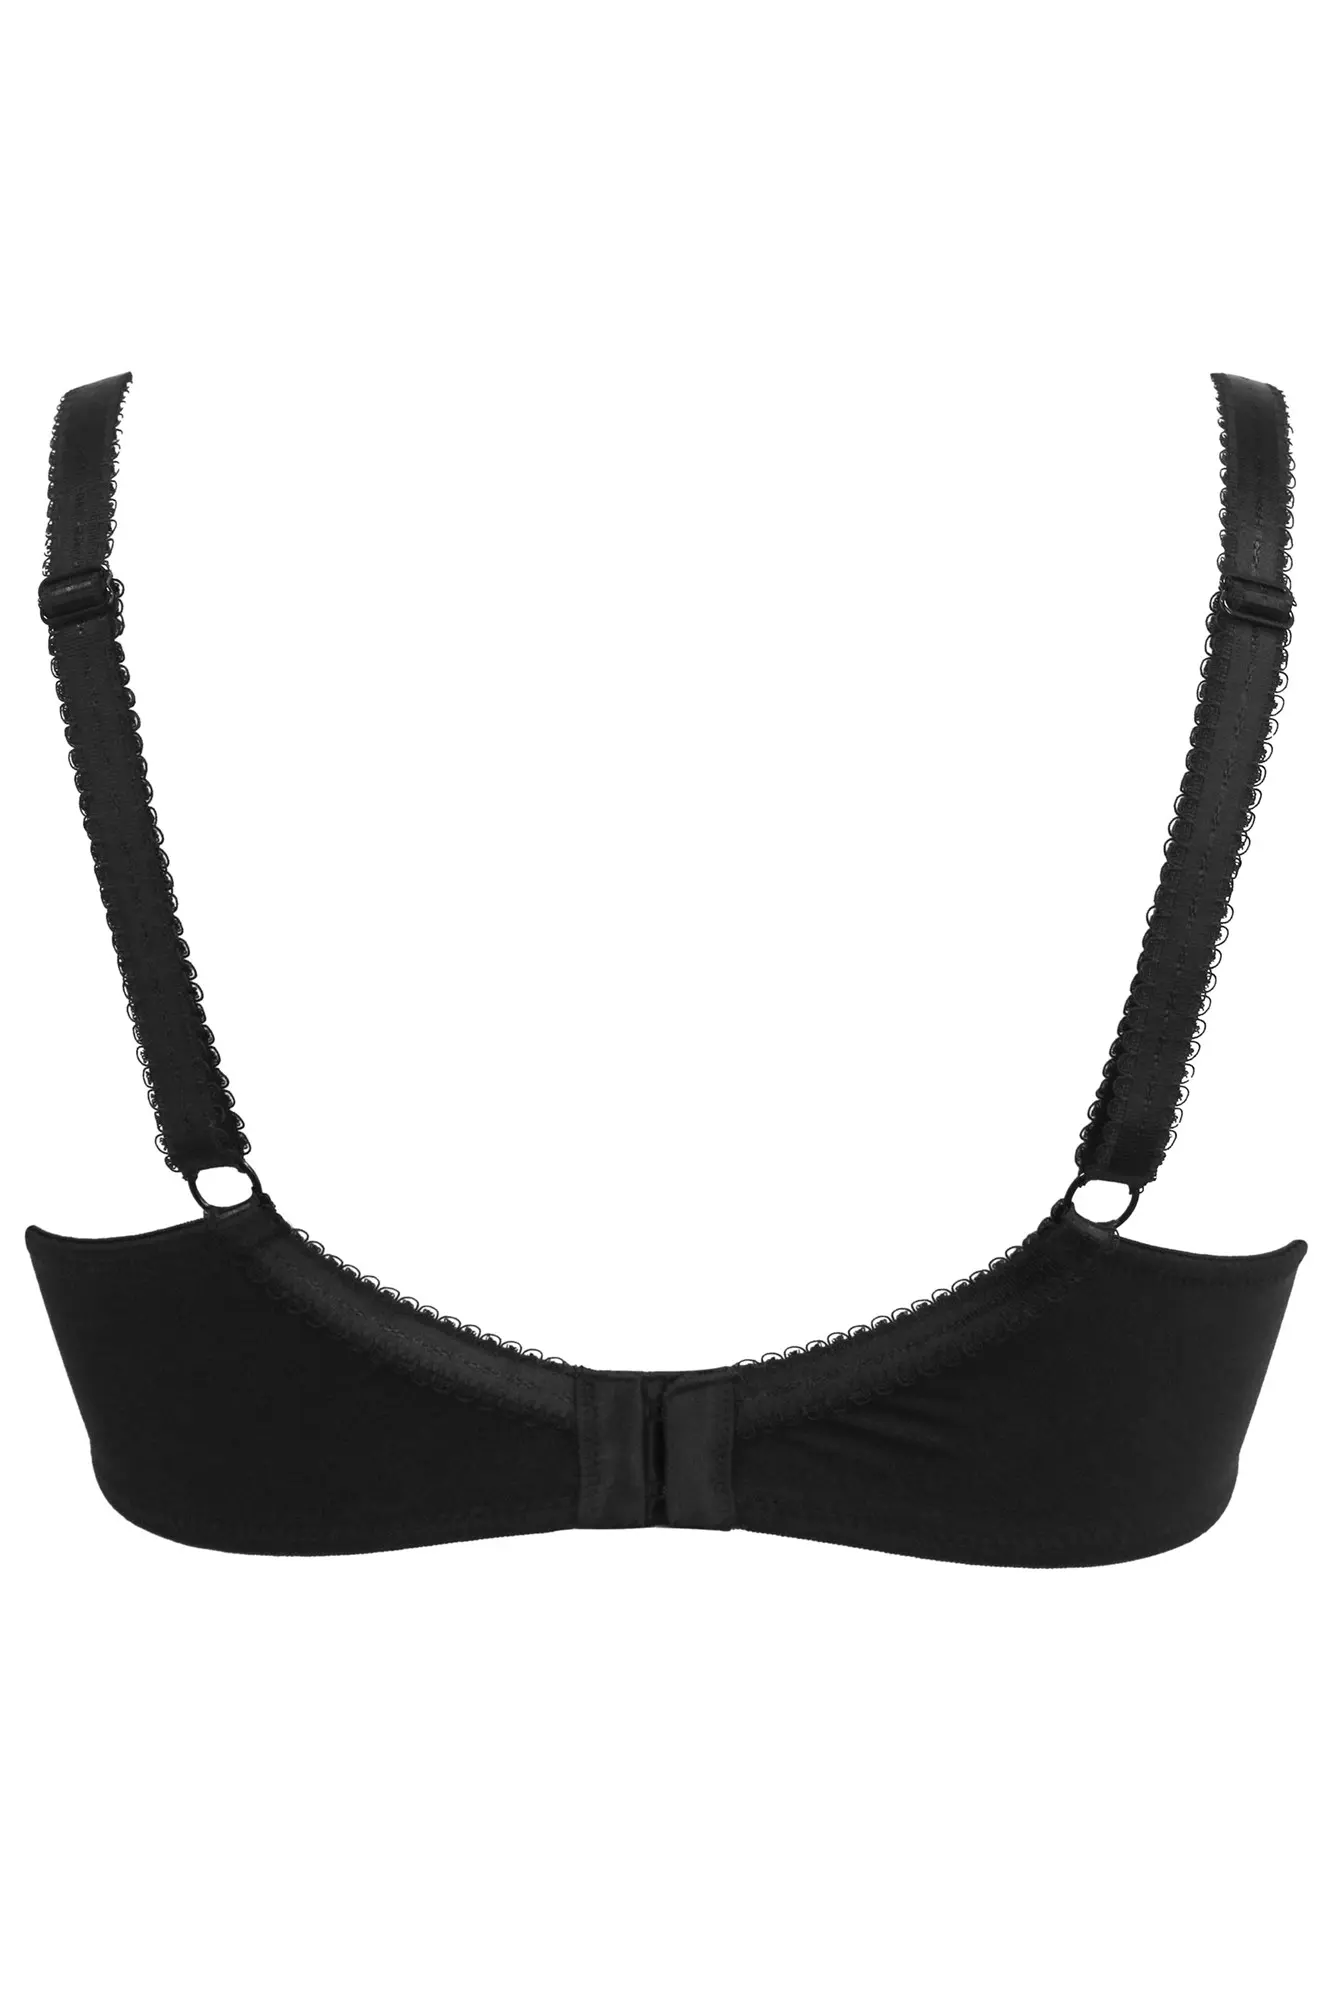 Pour Moi Aura Brief in Black - Busted Bra Shop